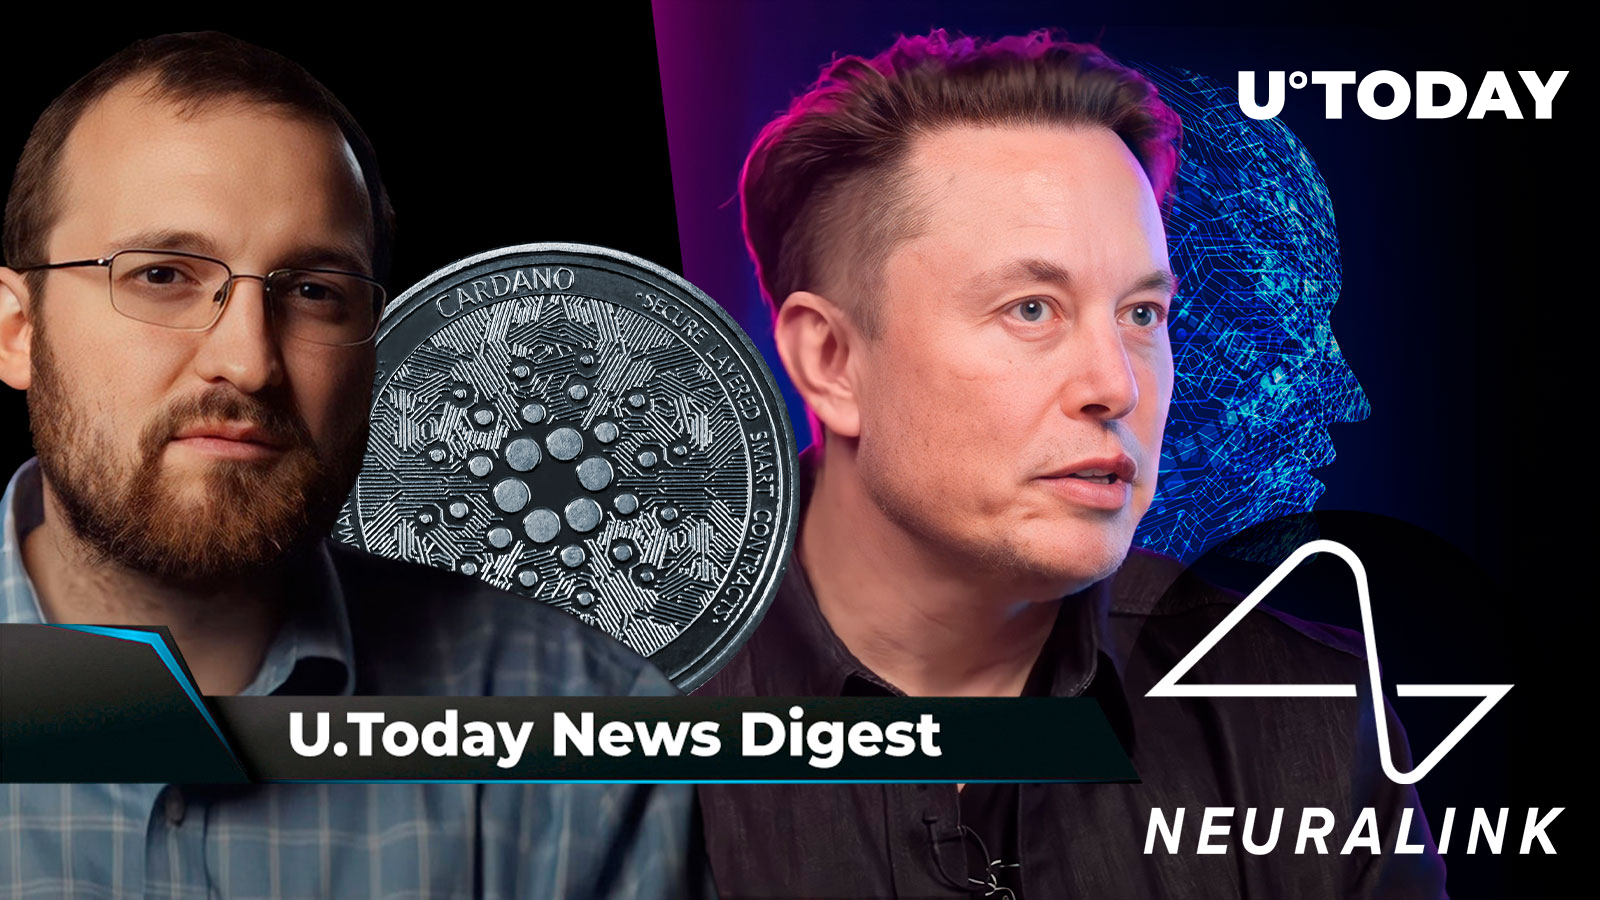 Cardano’s Charles Hoskinson Reacts to Epic ADA Prediction, Elon Musk Presents Neuralink’s First Product, SHIB Burn Rate Jumps 1,530%: Crypto News Digest by U.Today